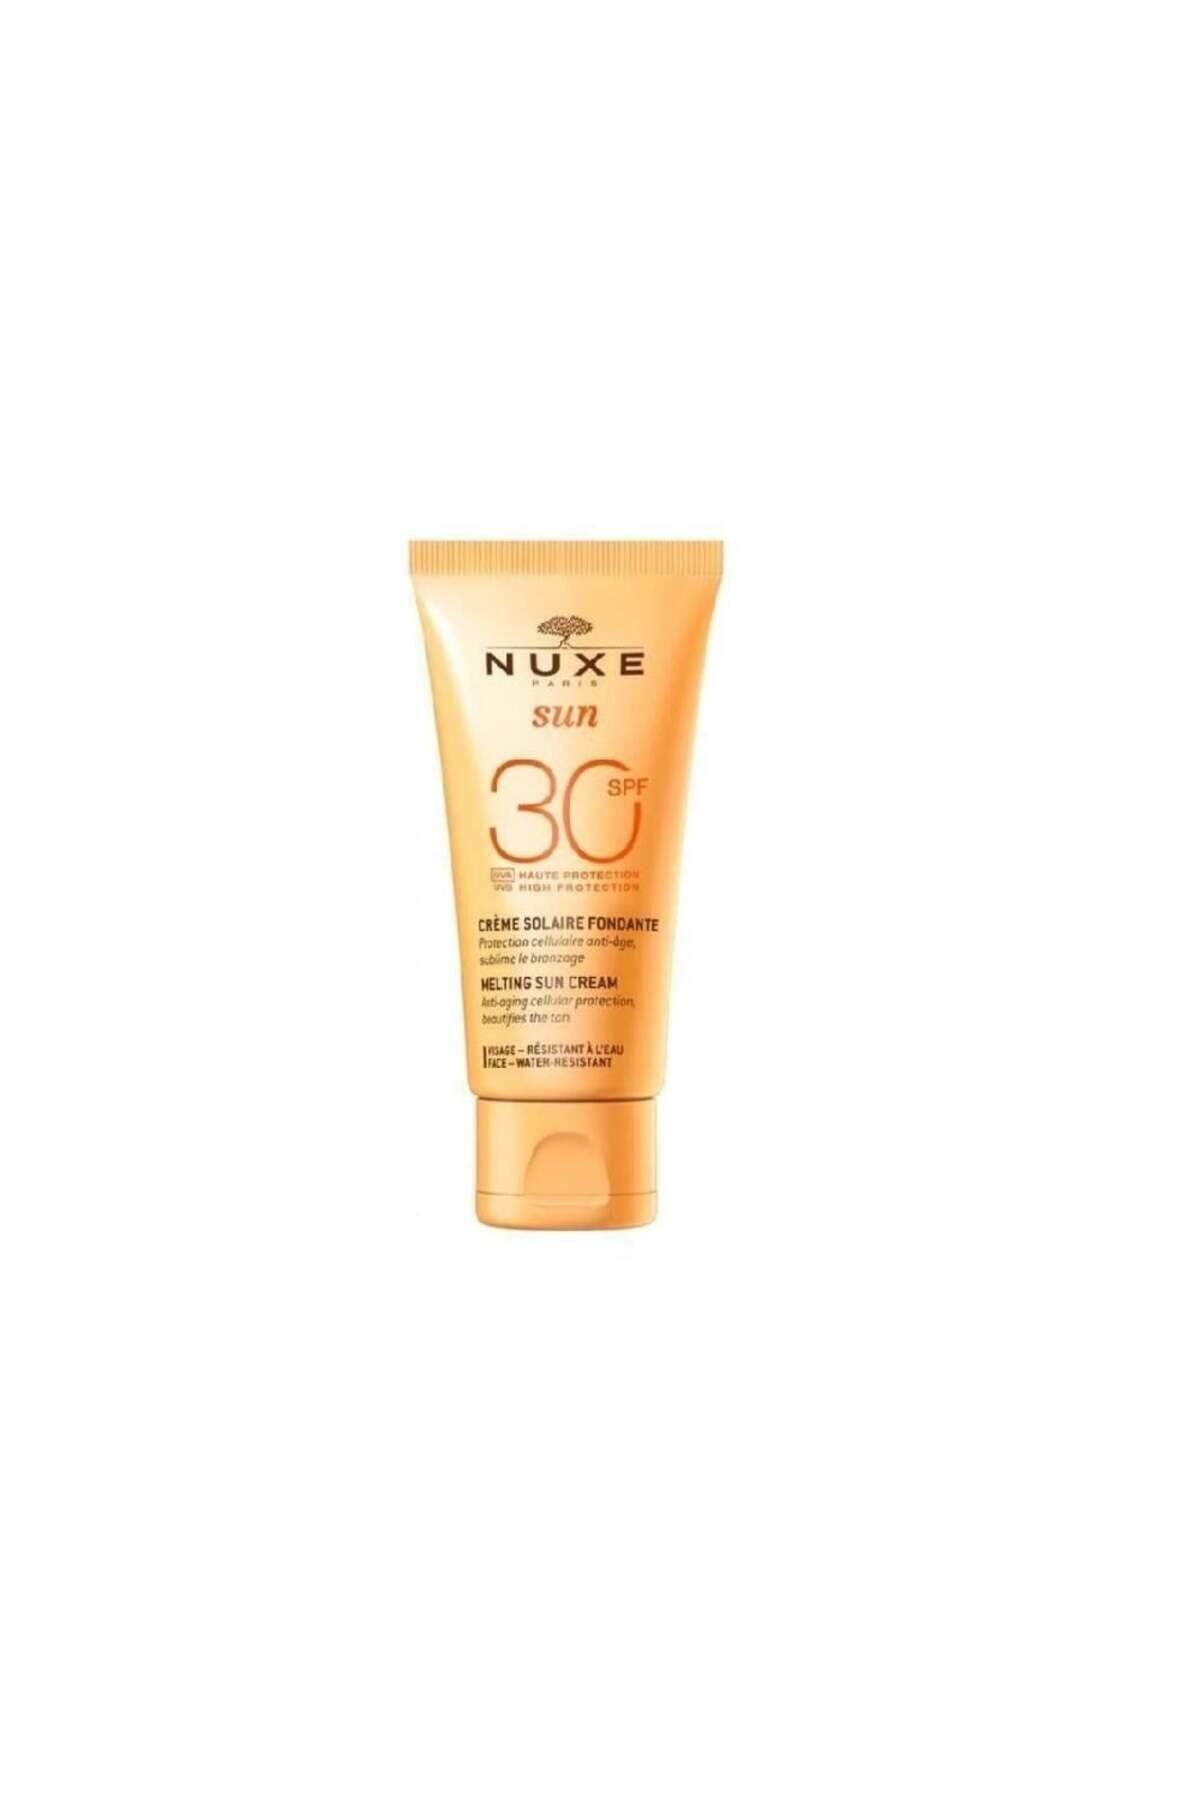 Nuxe Sunscreen Face Cream that Provides Anti-Aging Protection and Radiant Skin 30 SPF 50ml 1